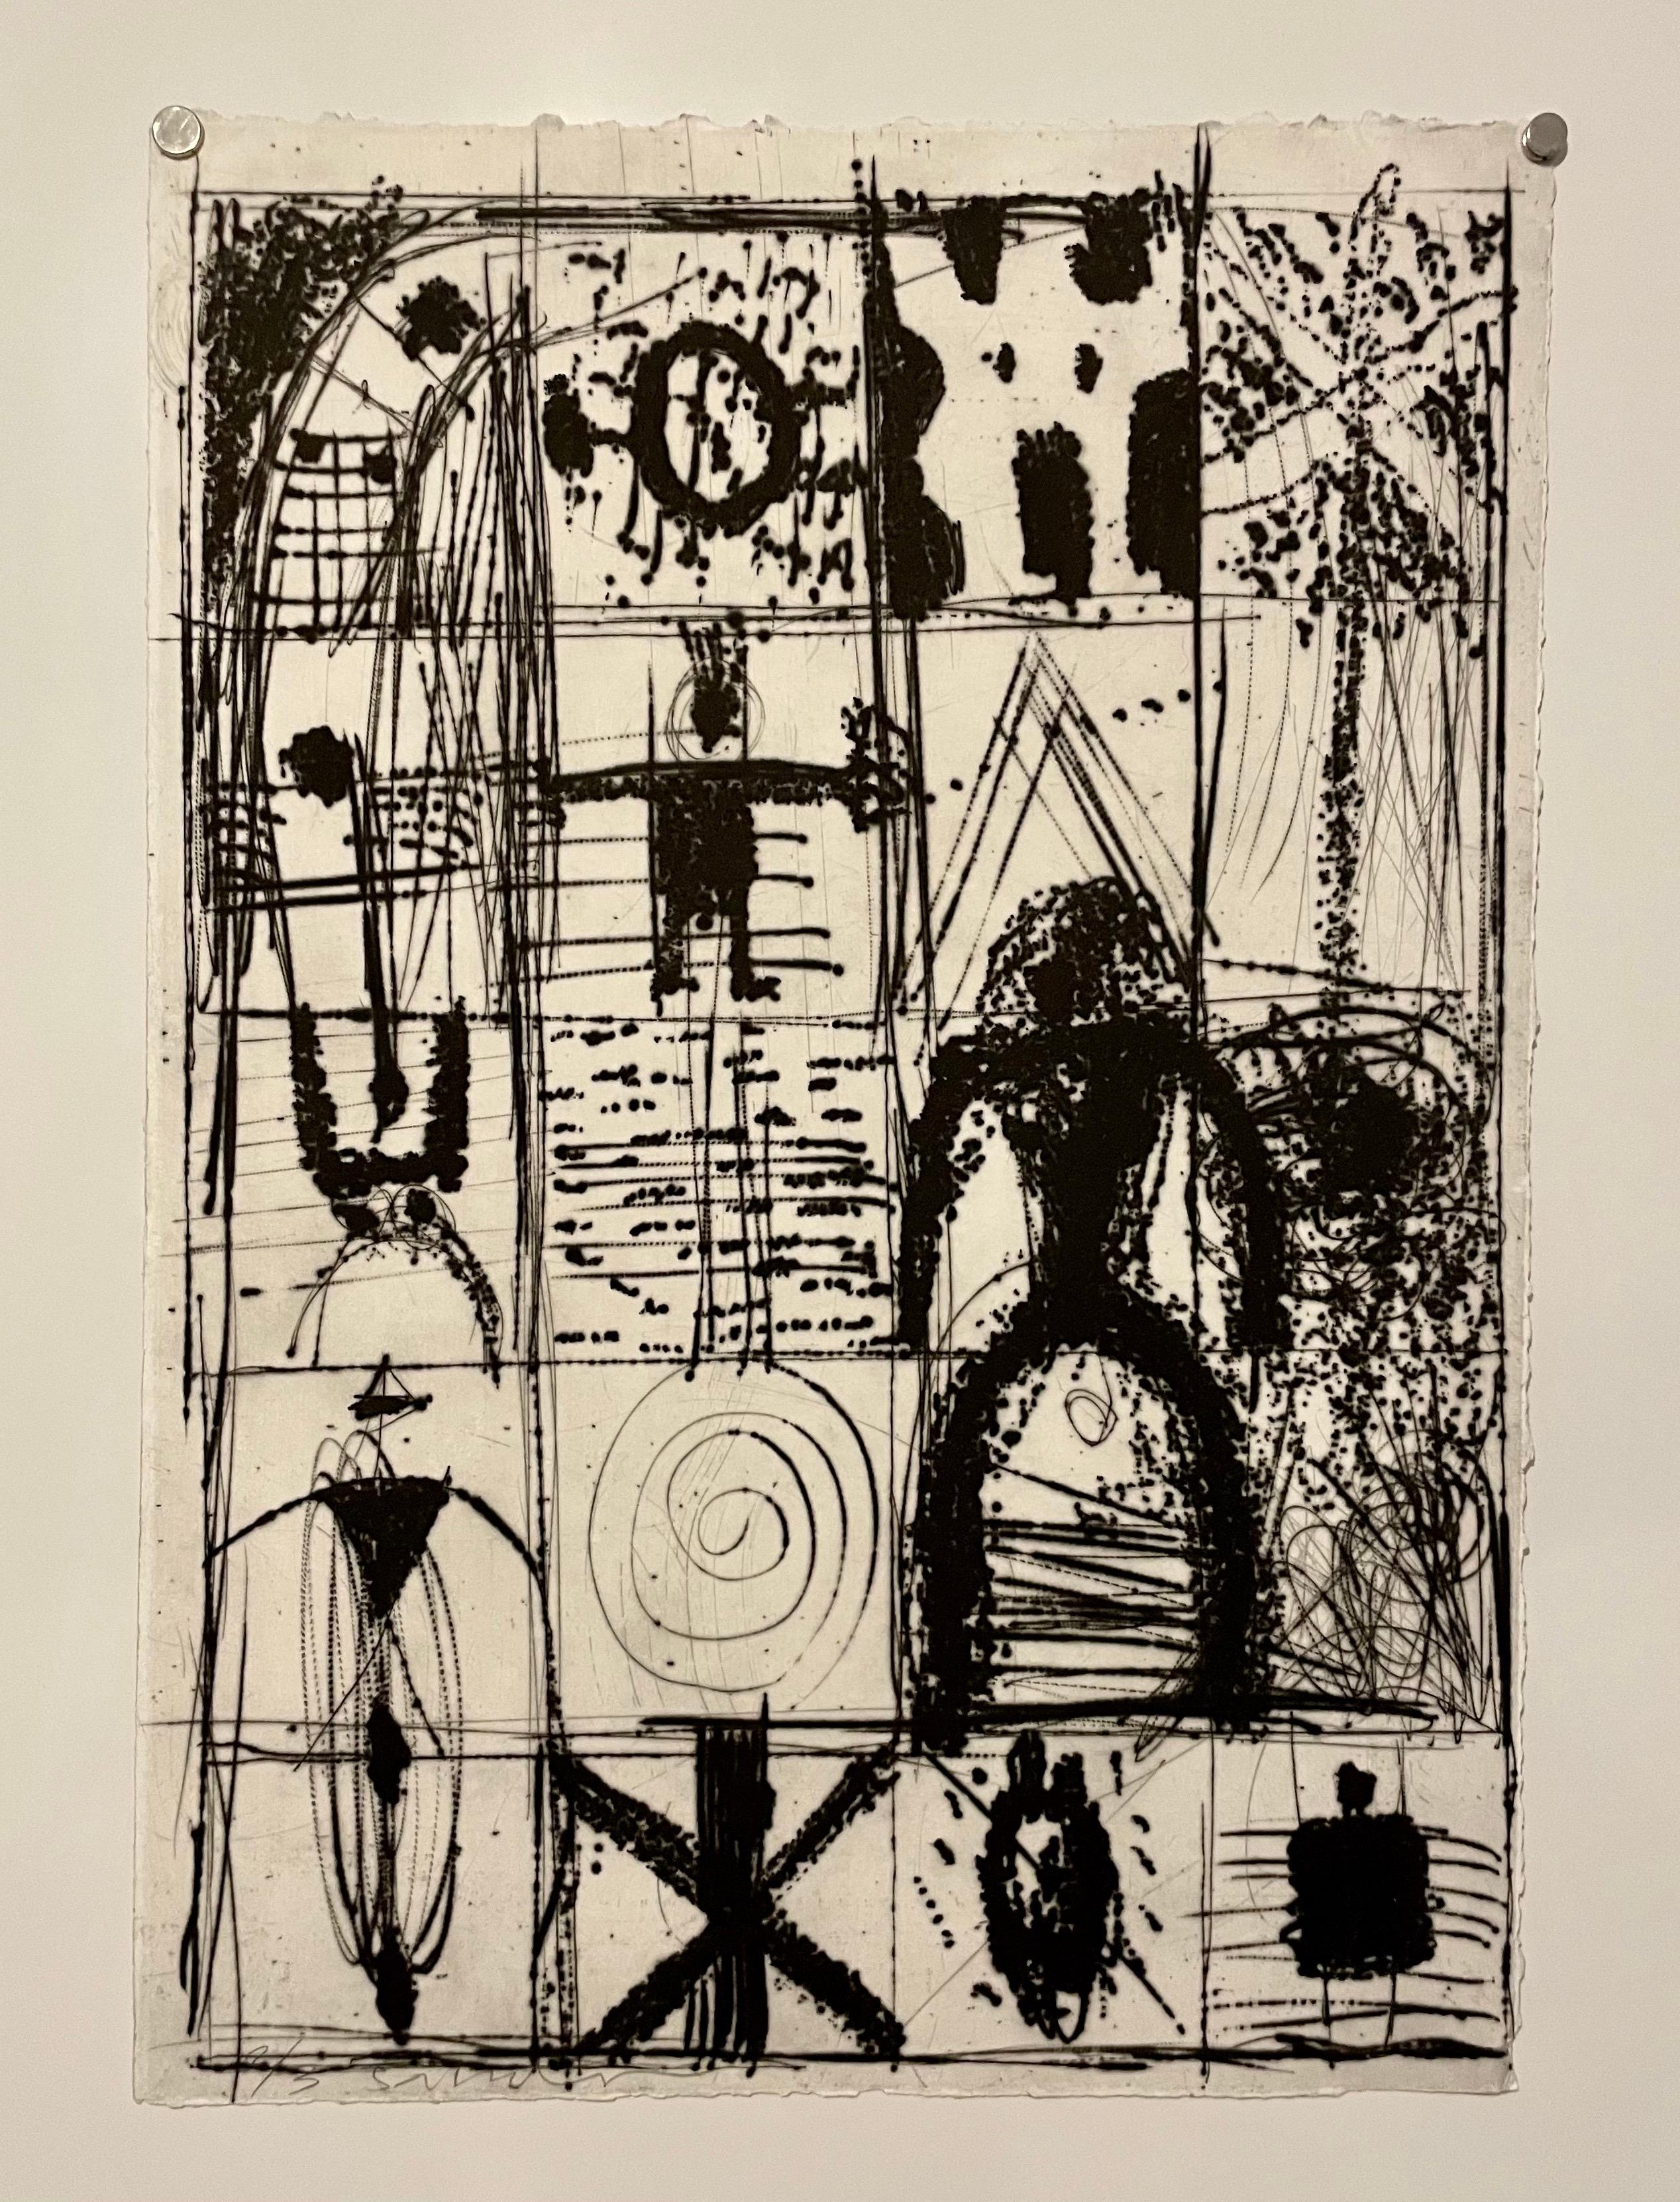 Moix, Santi (Spanish, b. 1960), Figural Abstraction, hybrid print with etching and aquatint, 23.5 x 16.75 inches, pencil signed and numbered 2/3.

Santi Moix (Barcelona, 1960) lives in New York since 1986. A multifaceted creator, Moix also makes